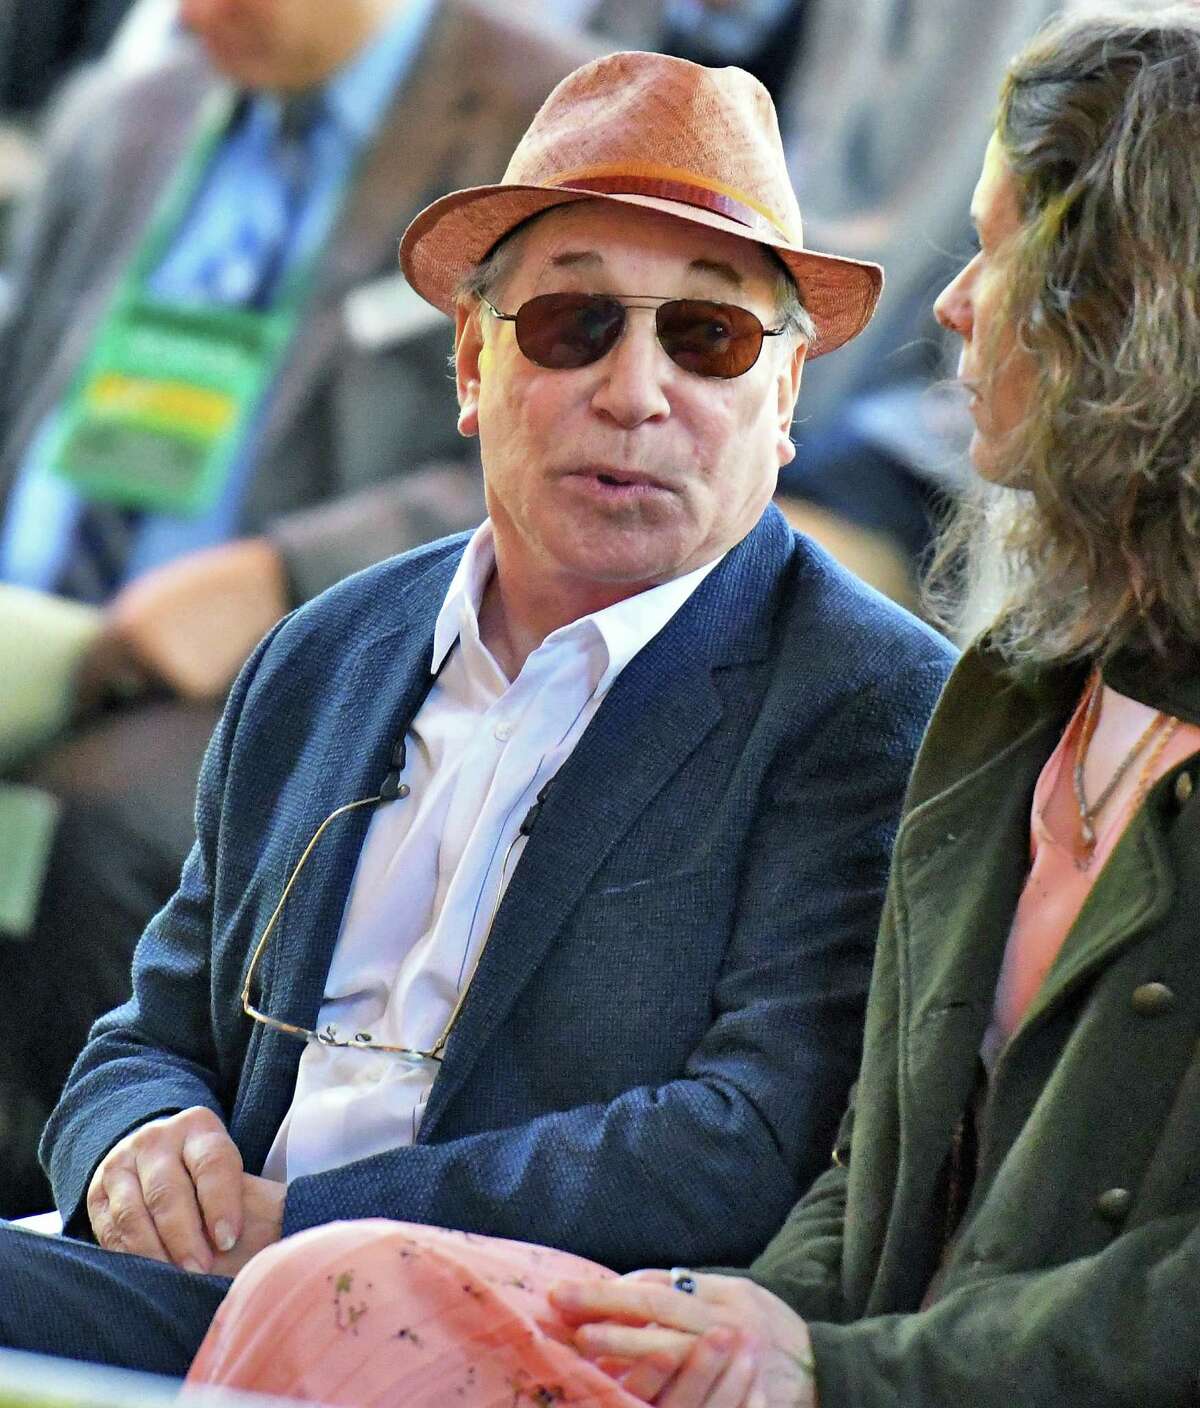 Paul Simon attends commencement exercises for Skidmore College at SPAC Saturday May 20, 2017 in Saratoga Springs, NY. (John Carl D'Annibale / Times Union)